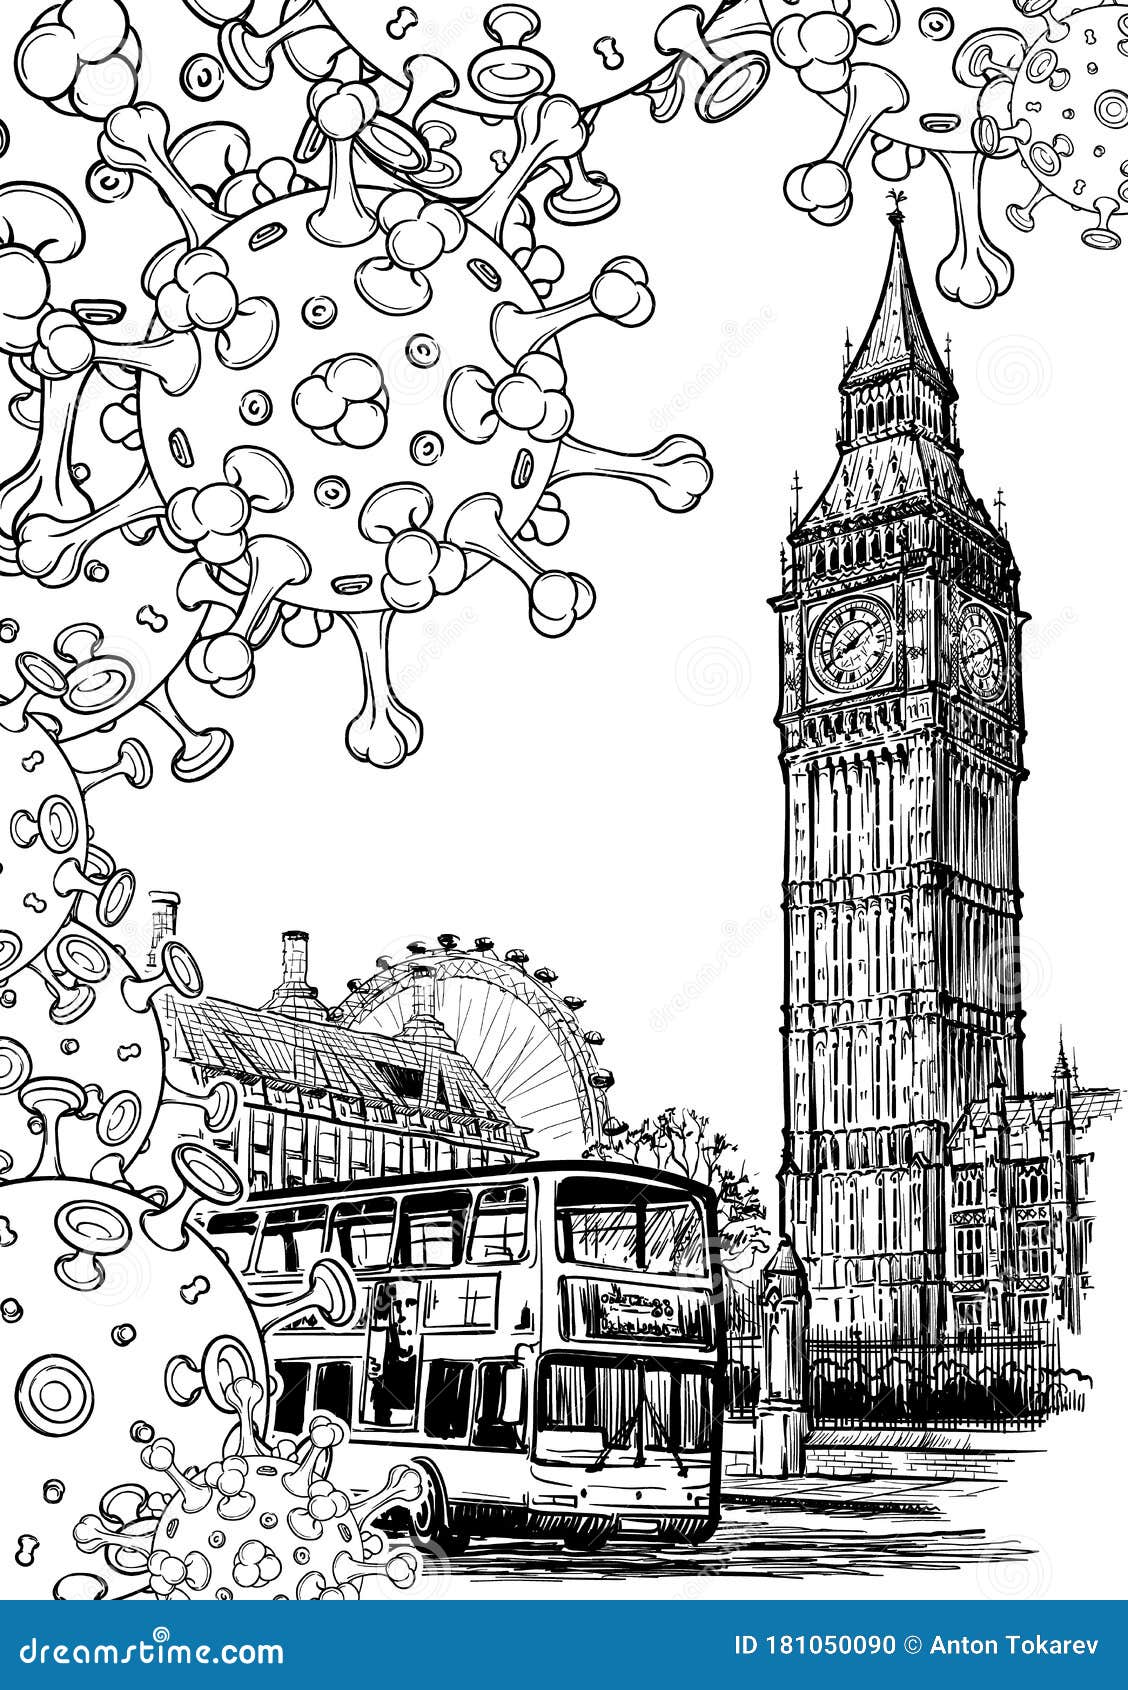 national quarantine background. london iconic view with big ben and doubledecker bus with coronavirus particles.